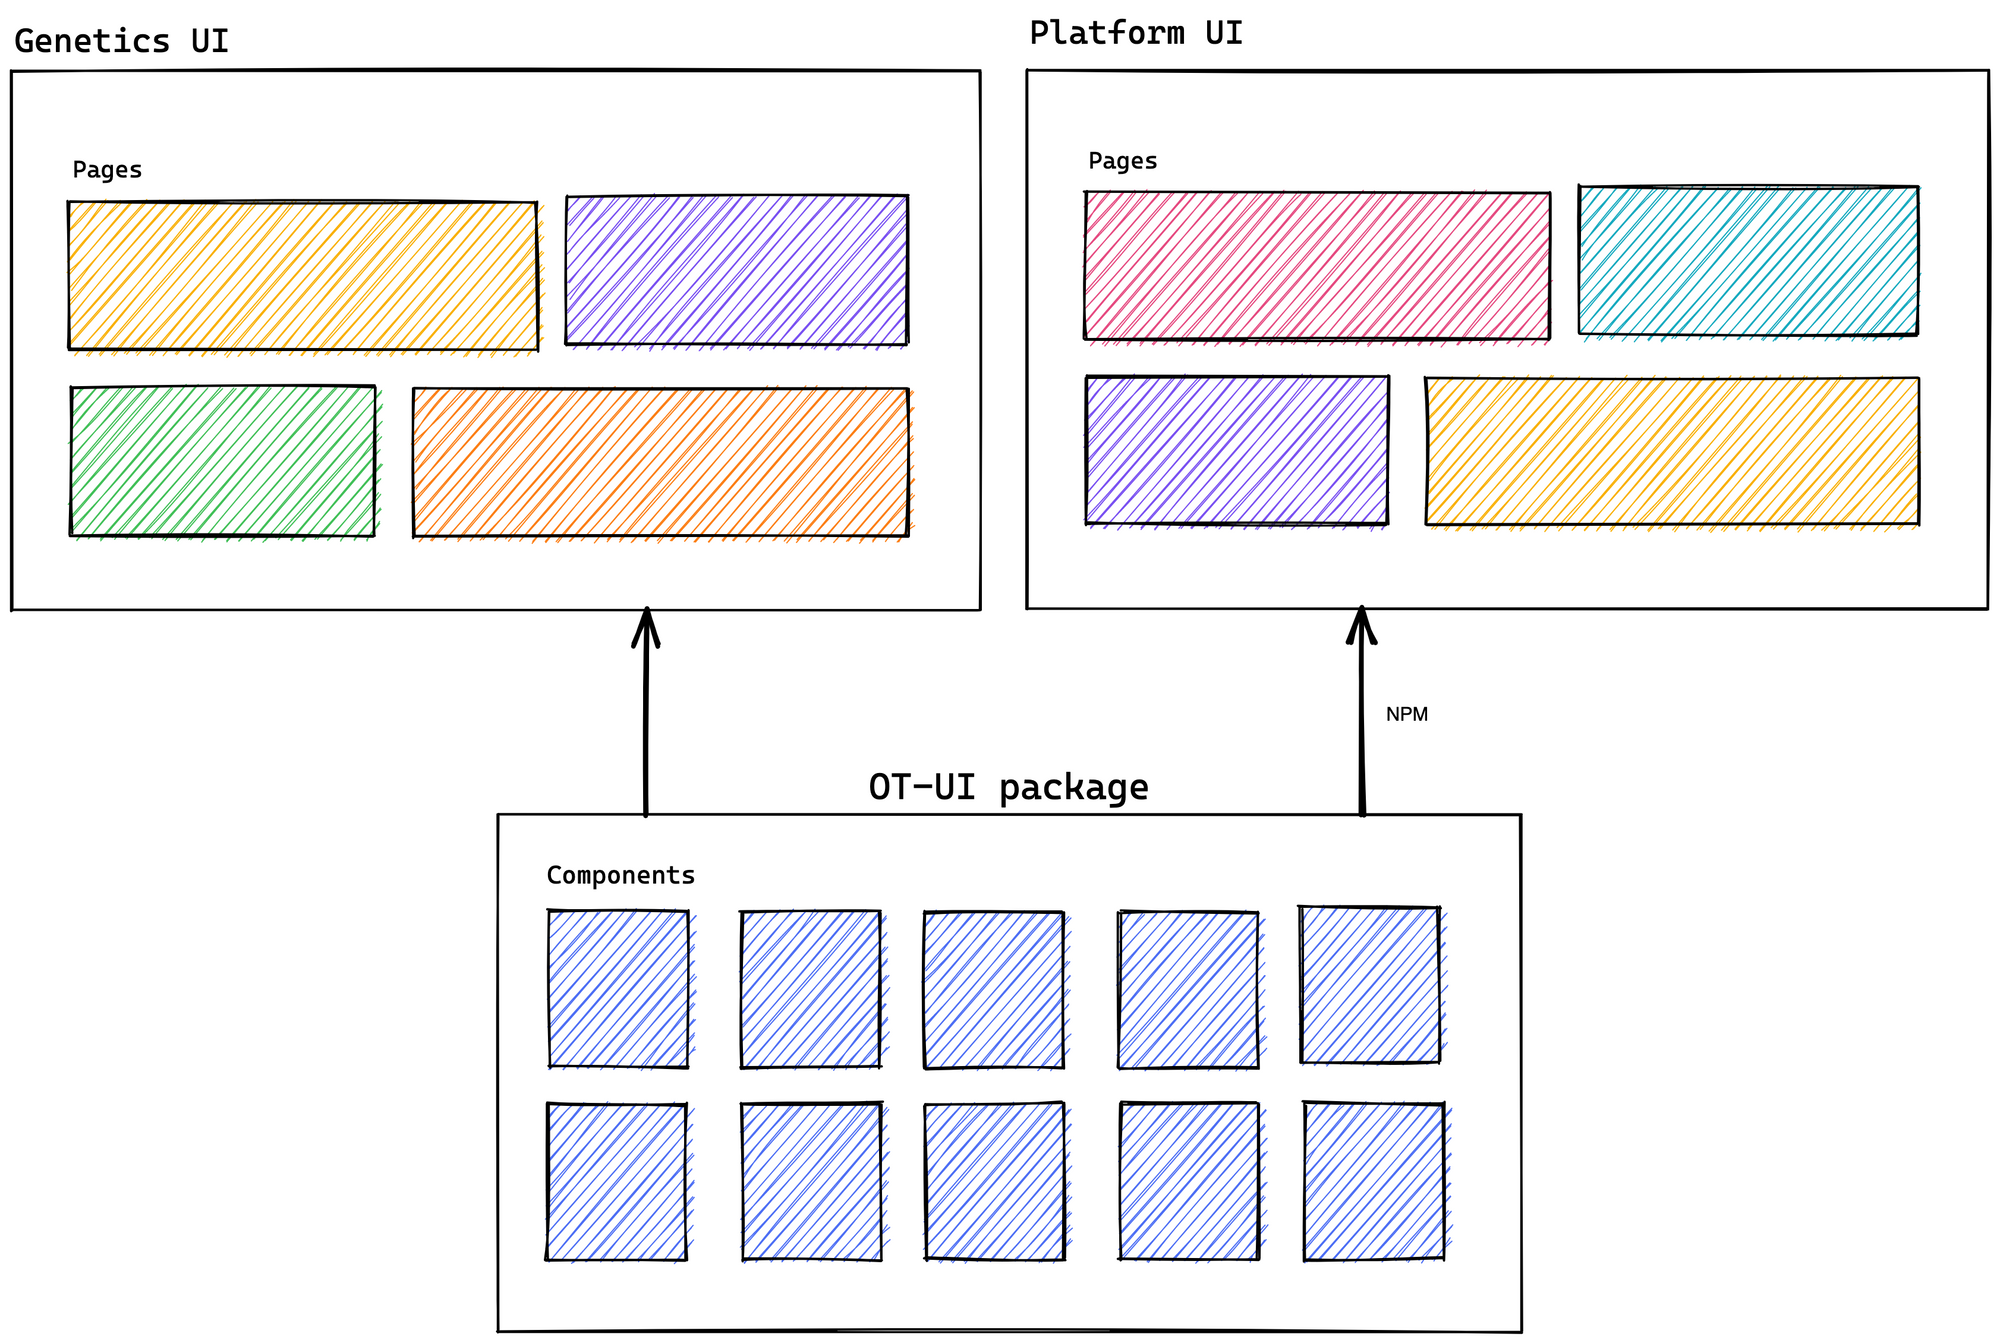 The Genetics UI and Platform UI are shown as pages with different components represented by different coloured boxes. The OT-UI package is represented as a set of identical components which feeds into the Genetics and Platform UIs.